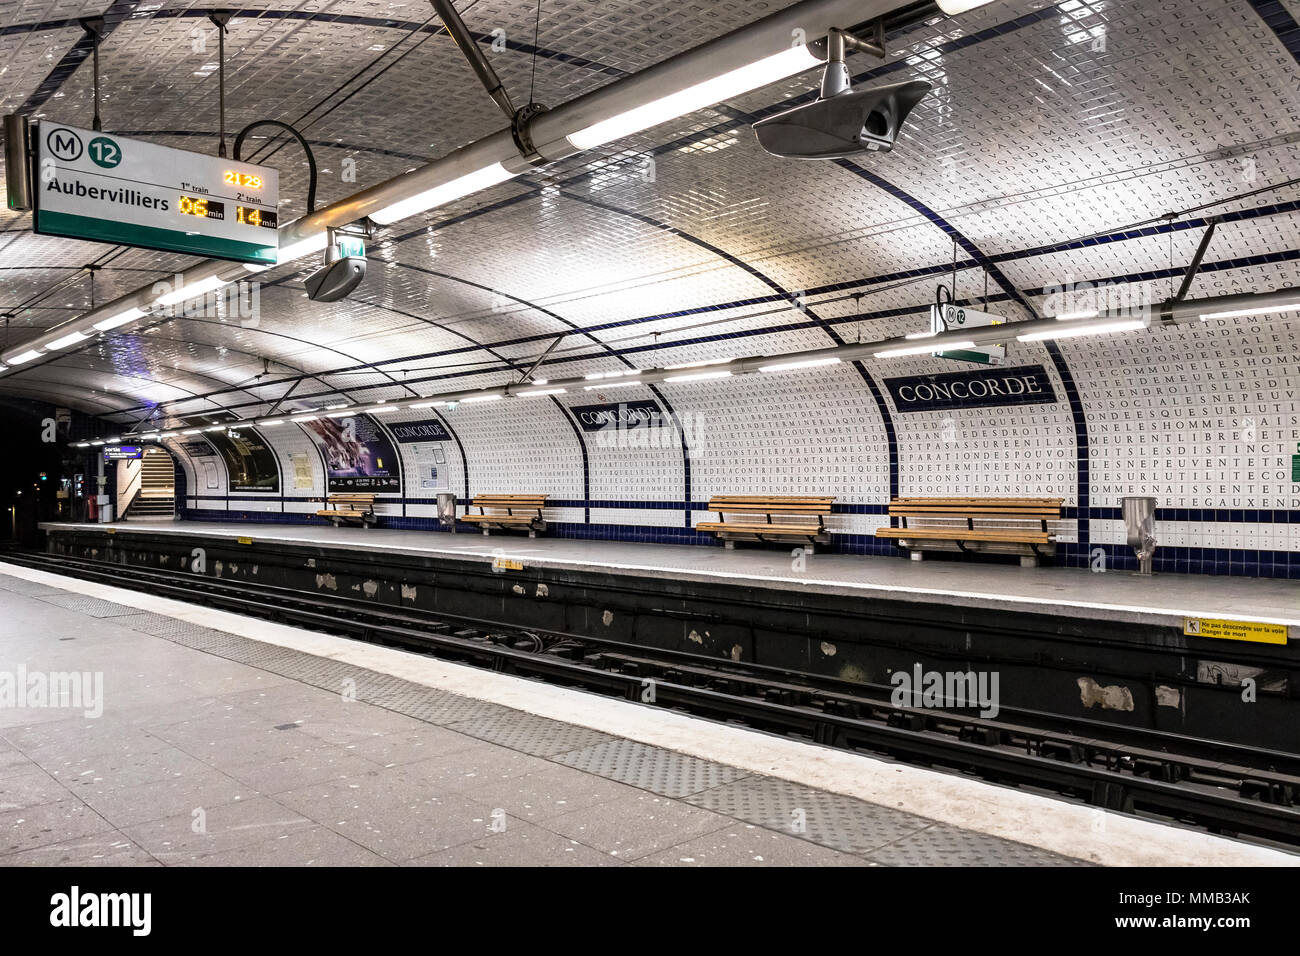 The Paris Metro Concorde station has 49,000 enameled tiles with letters ...